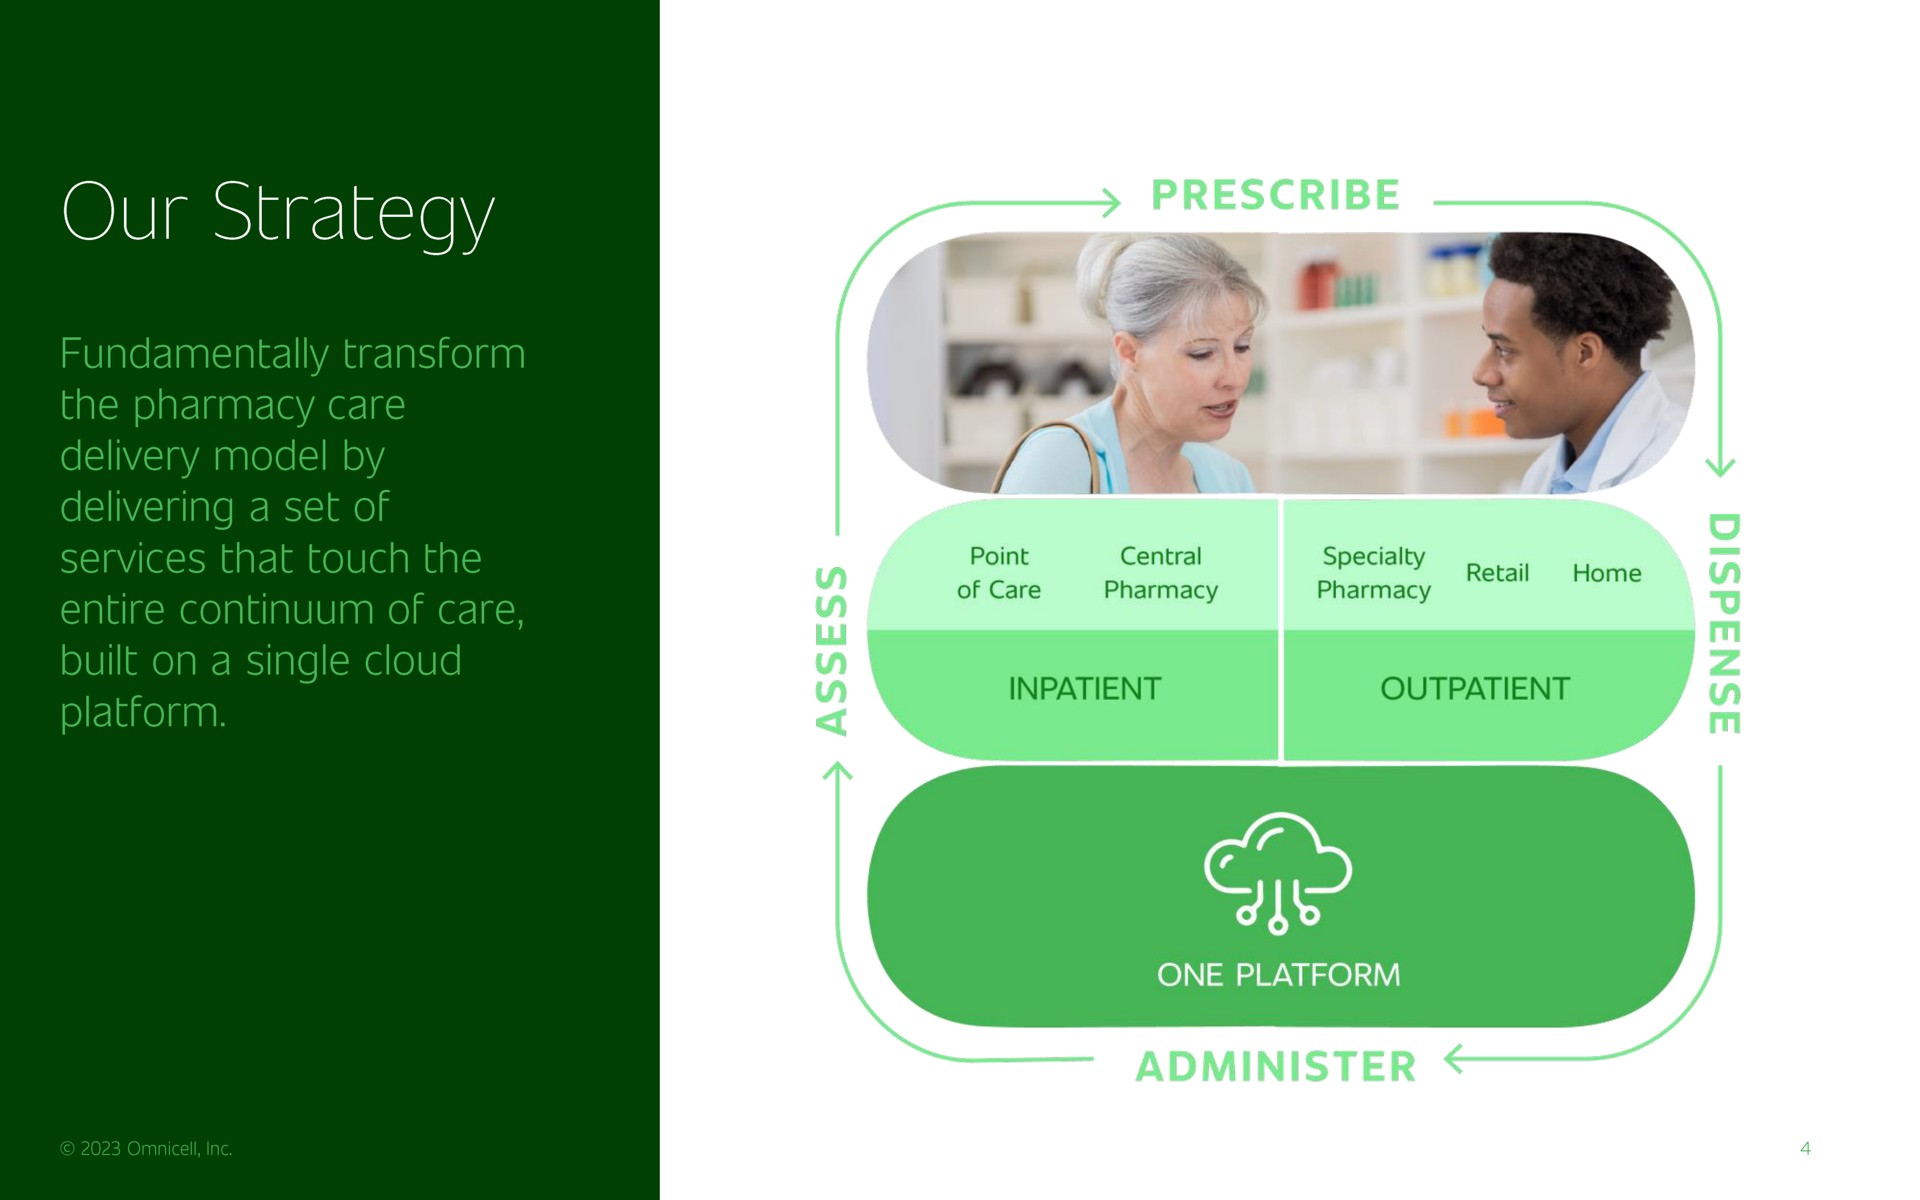 our strategy one platform ras | Omnicell